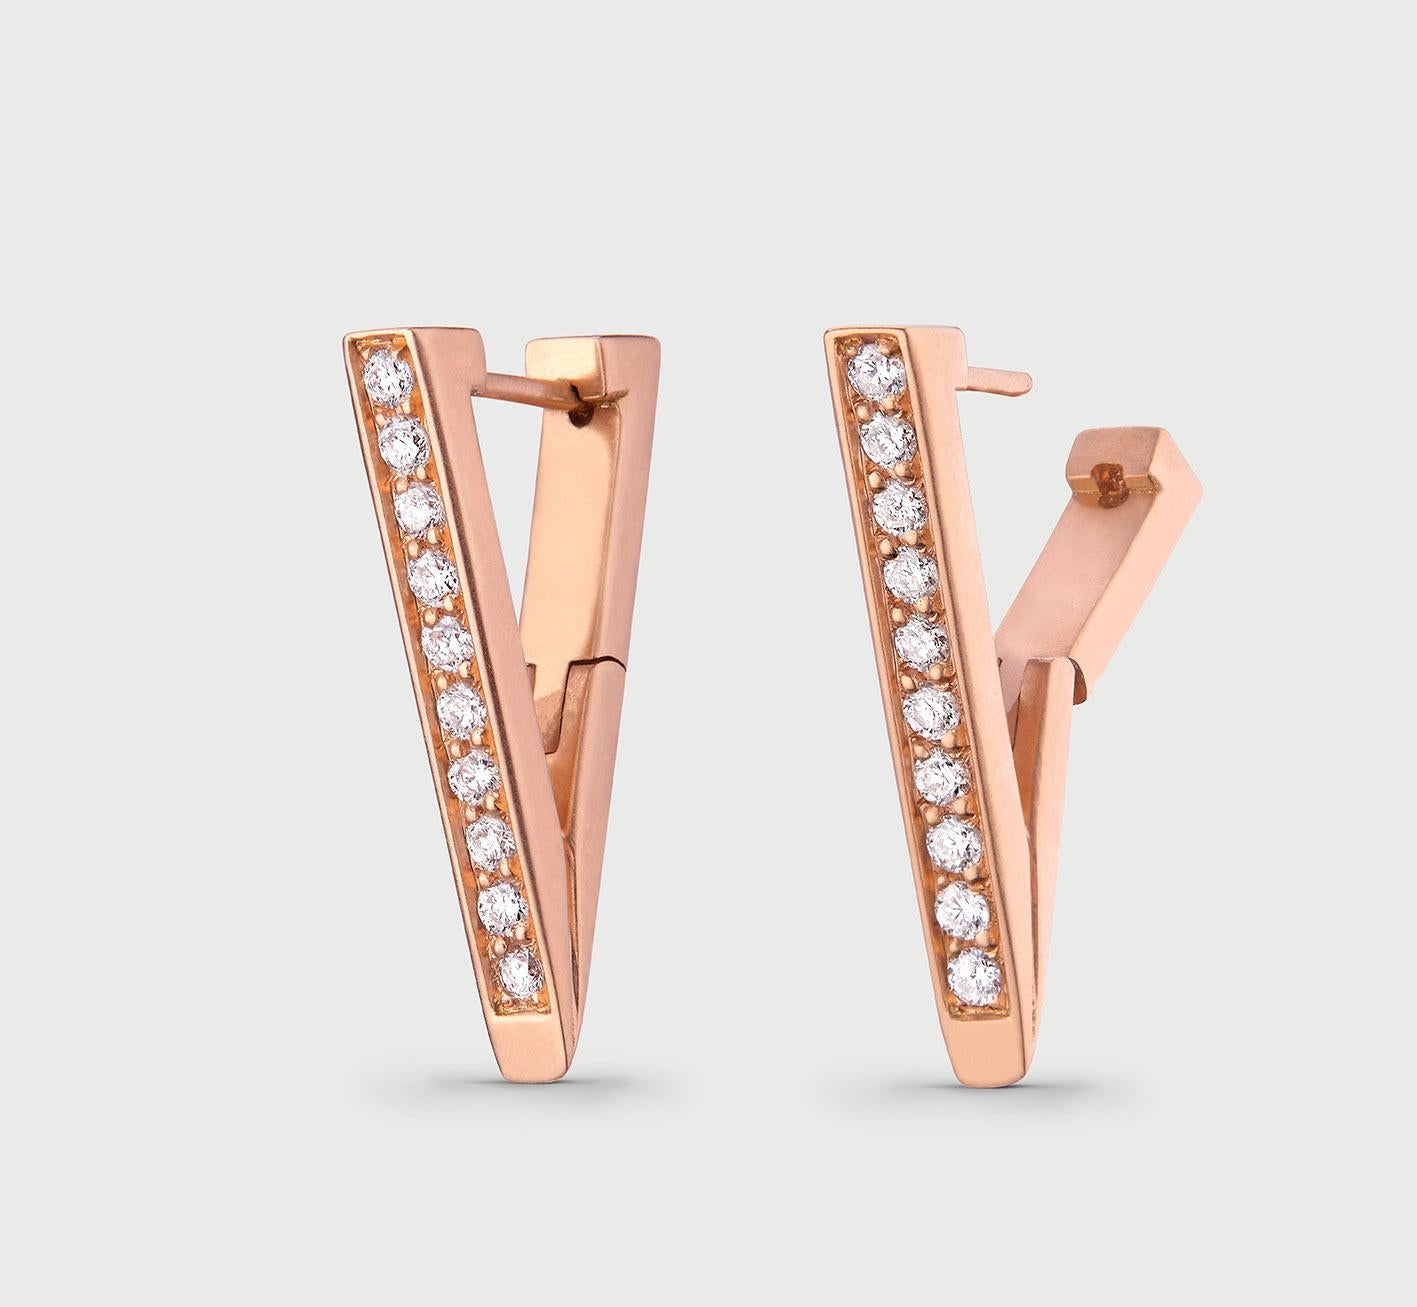 Small Hoop Earrings crafted in 18K Rose Gold & White Diamonds 0.28 ct.  18K Matt Rose Gold 5.4 gr. 

Hand crafted and made in Italy. Gemstones are natural and not treated. 

Design is inspired by sacred geometry - the triangle. 
Triangles are a